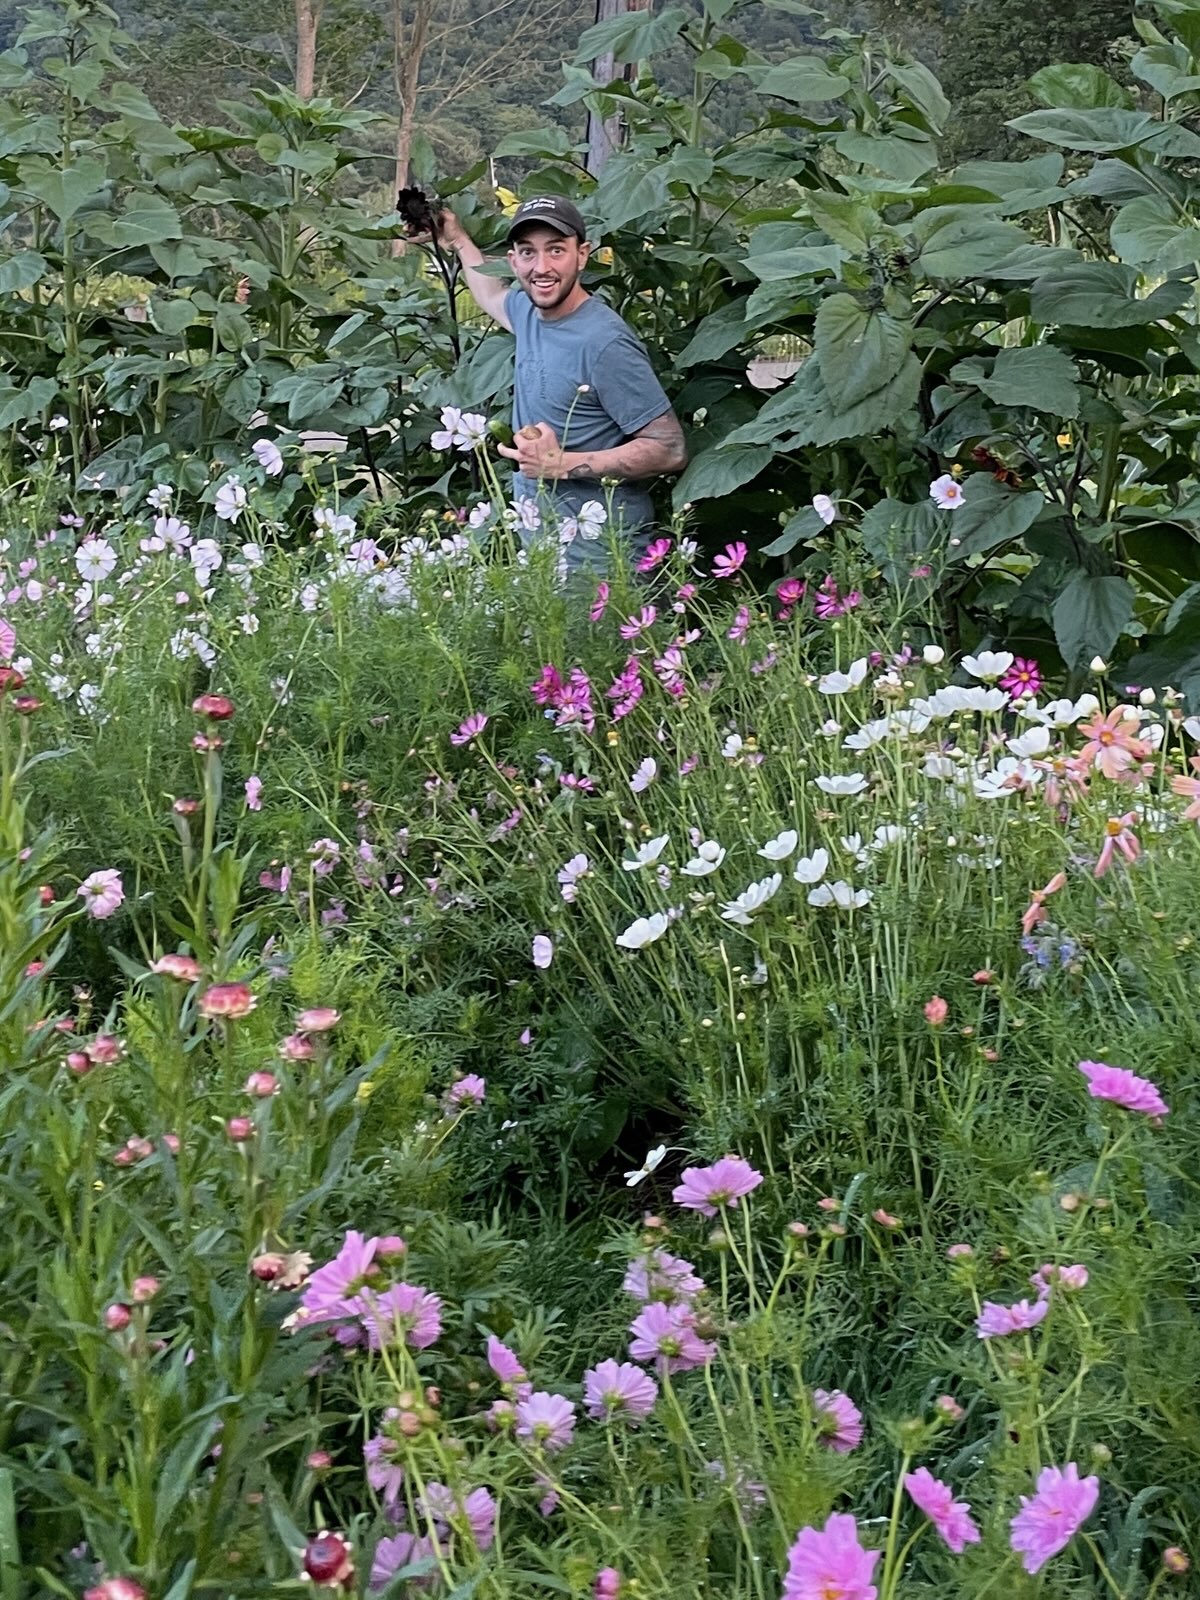 Oliver Gawlick in the Happy Compromise Farm + Sanctuary garden with wildflowers